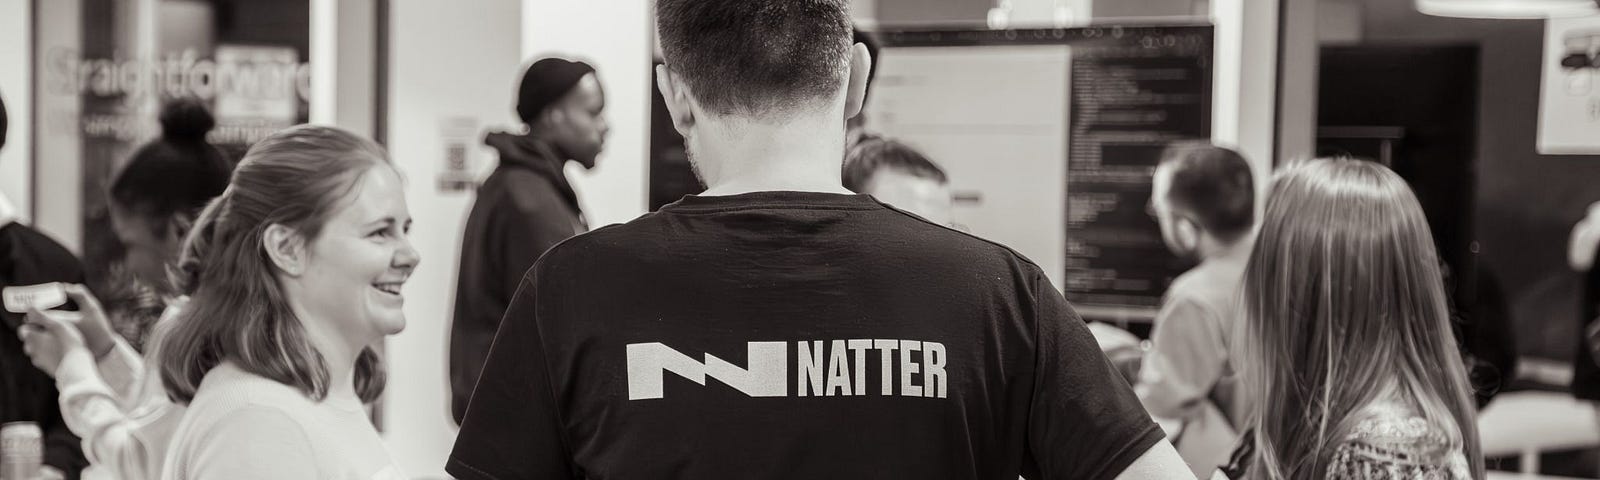 Natter community volunteer showing the branding on the back of their shirt chatting with 2 girls who attended the event